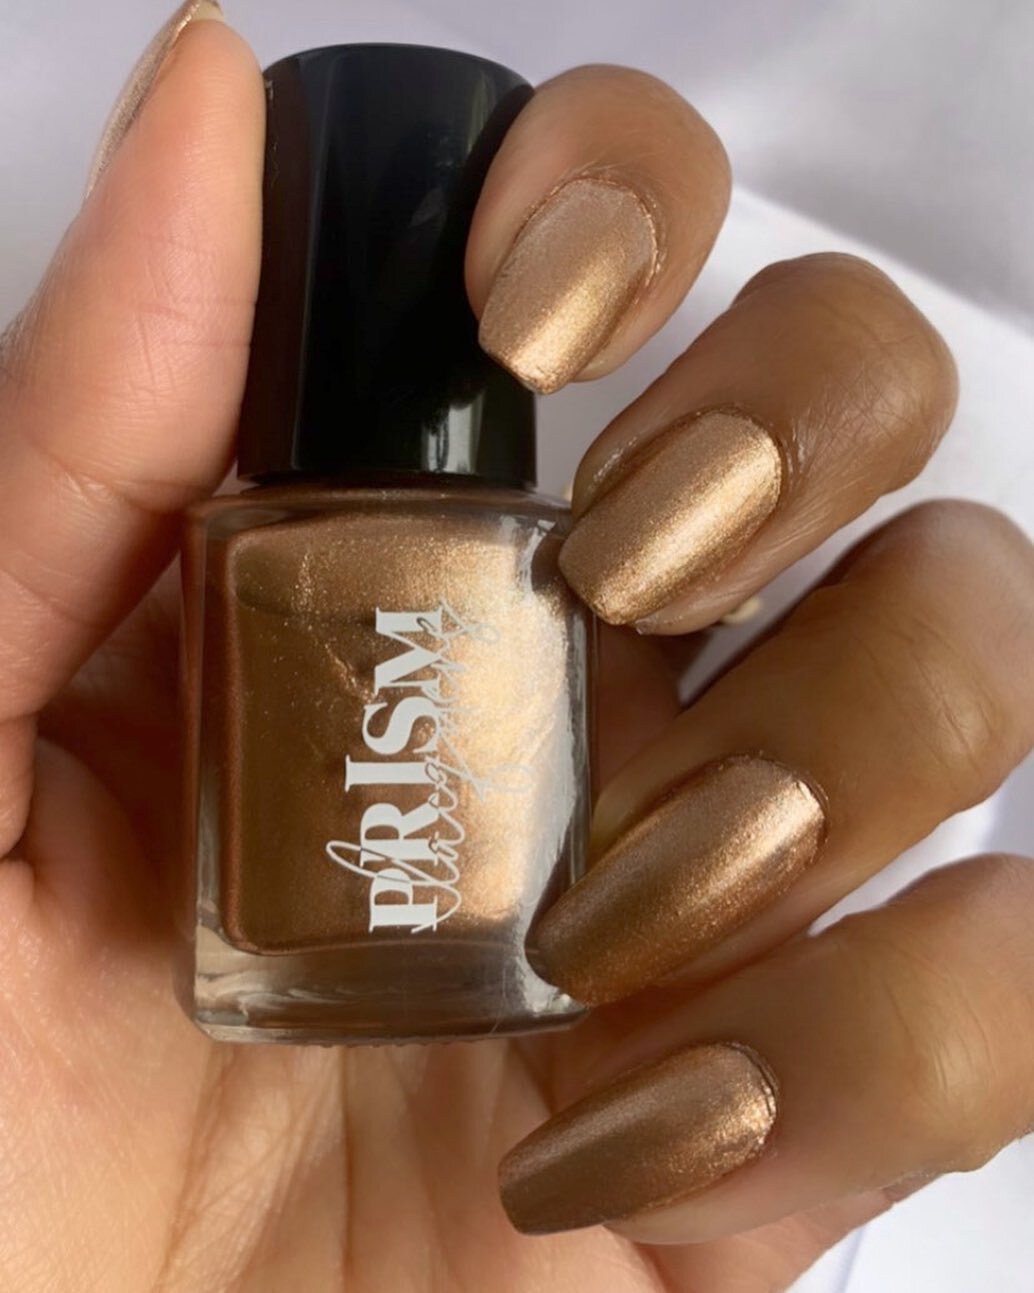 @kuulnails shining bright in Entrepreneu(her) 😍

We love getting mani mail. Want to show off your favorite shade? Be sure to tag us in your Prism mani. 💛